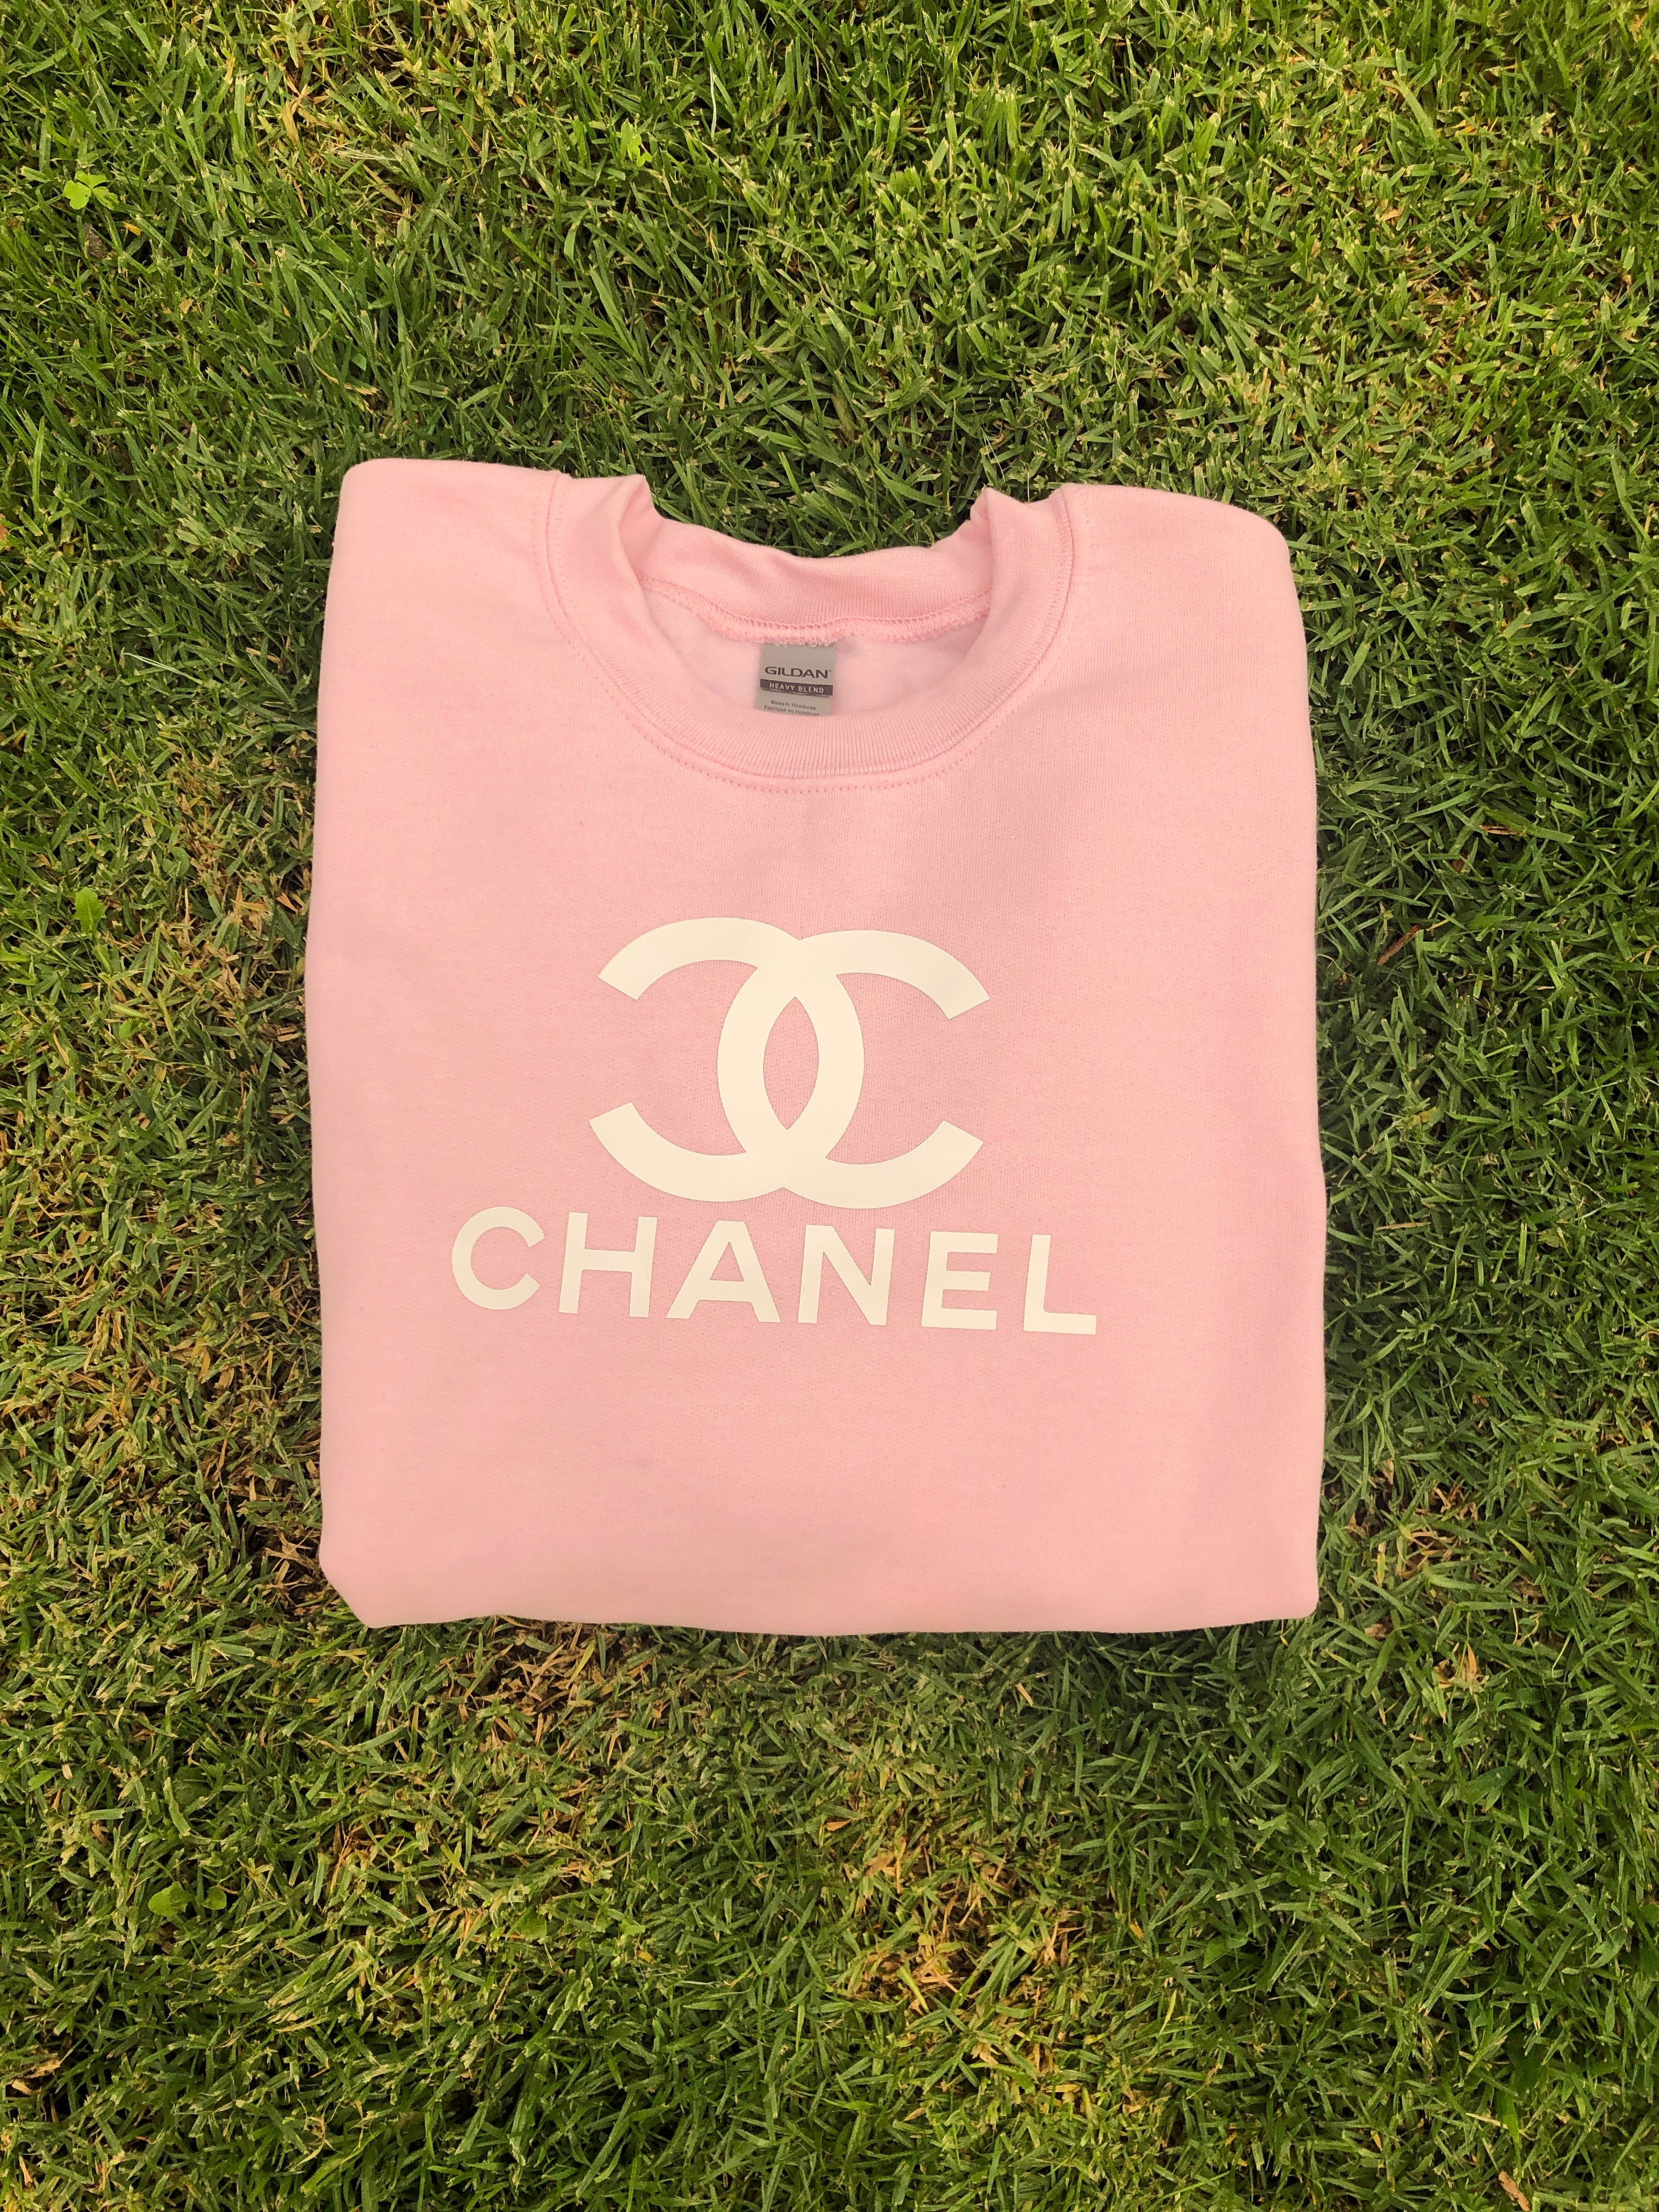 The price of Chanels F1 Tshirt astonishes the entire Internet  HIGHXTAR